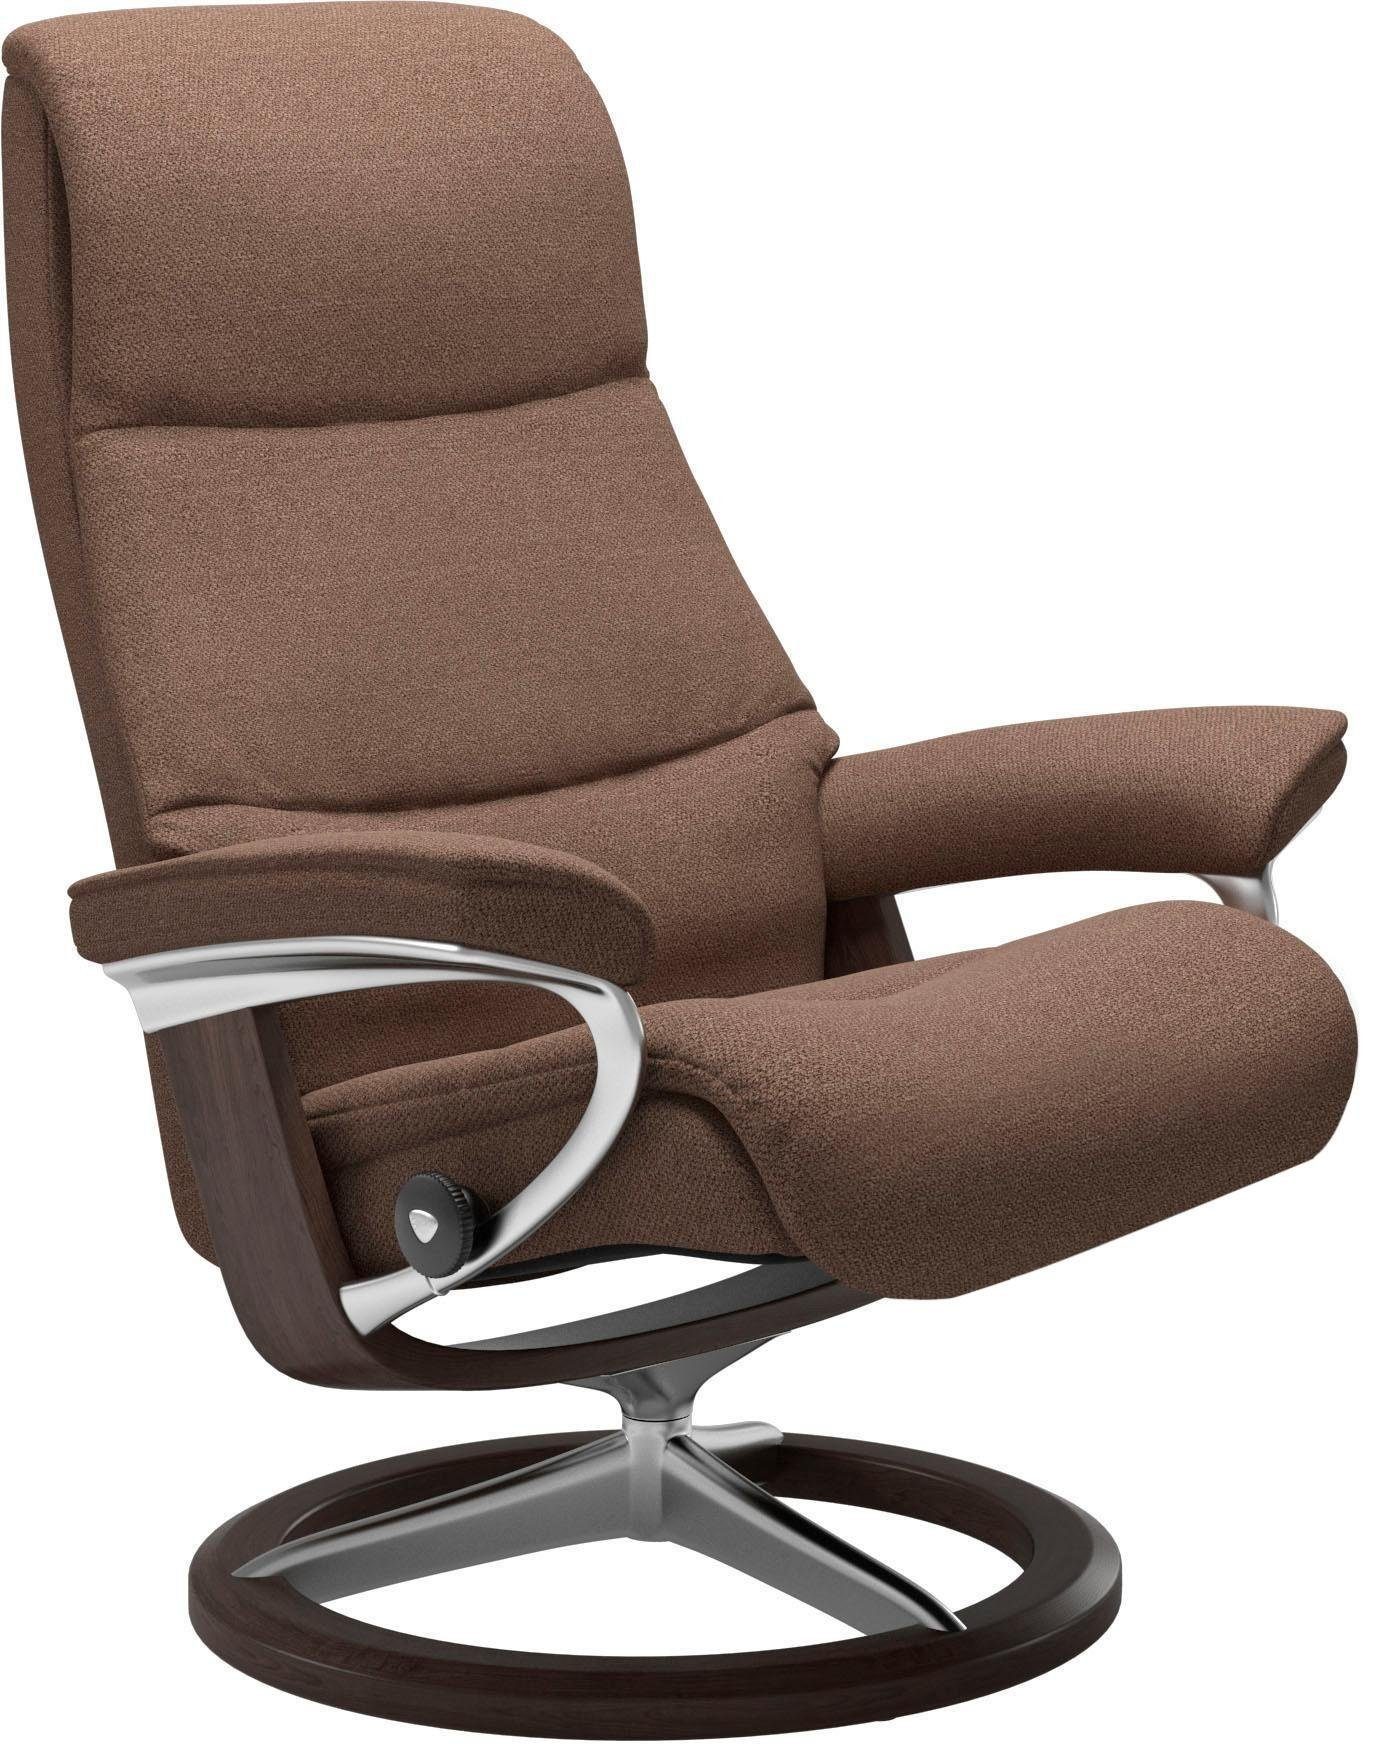 Stressless® Größe Base, L,Gestell Signature Wenge Relaxsessel View, mit